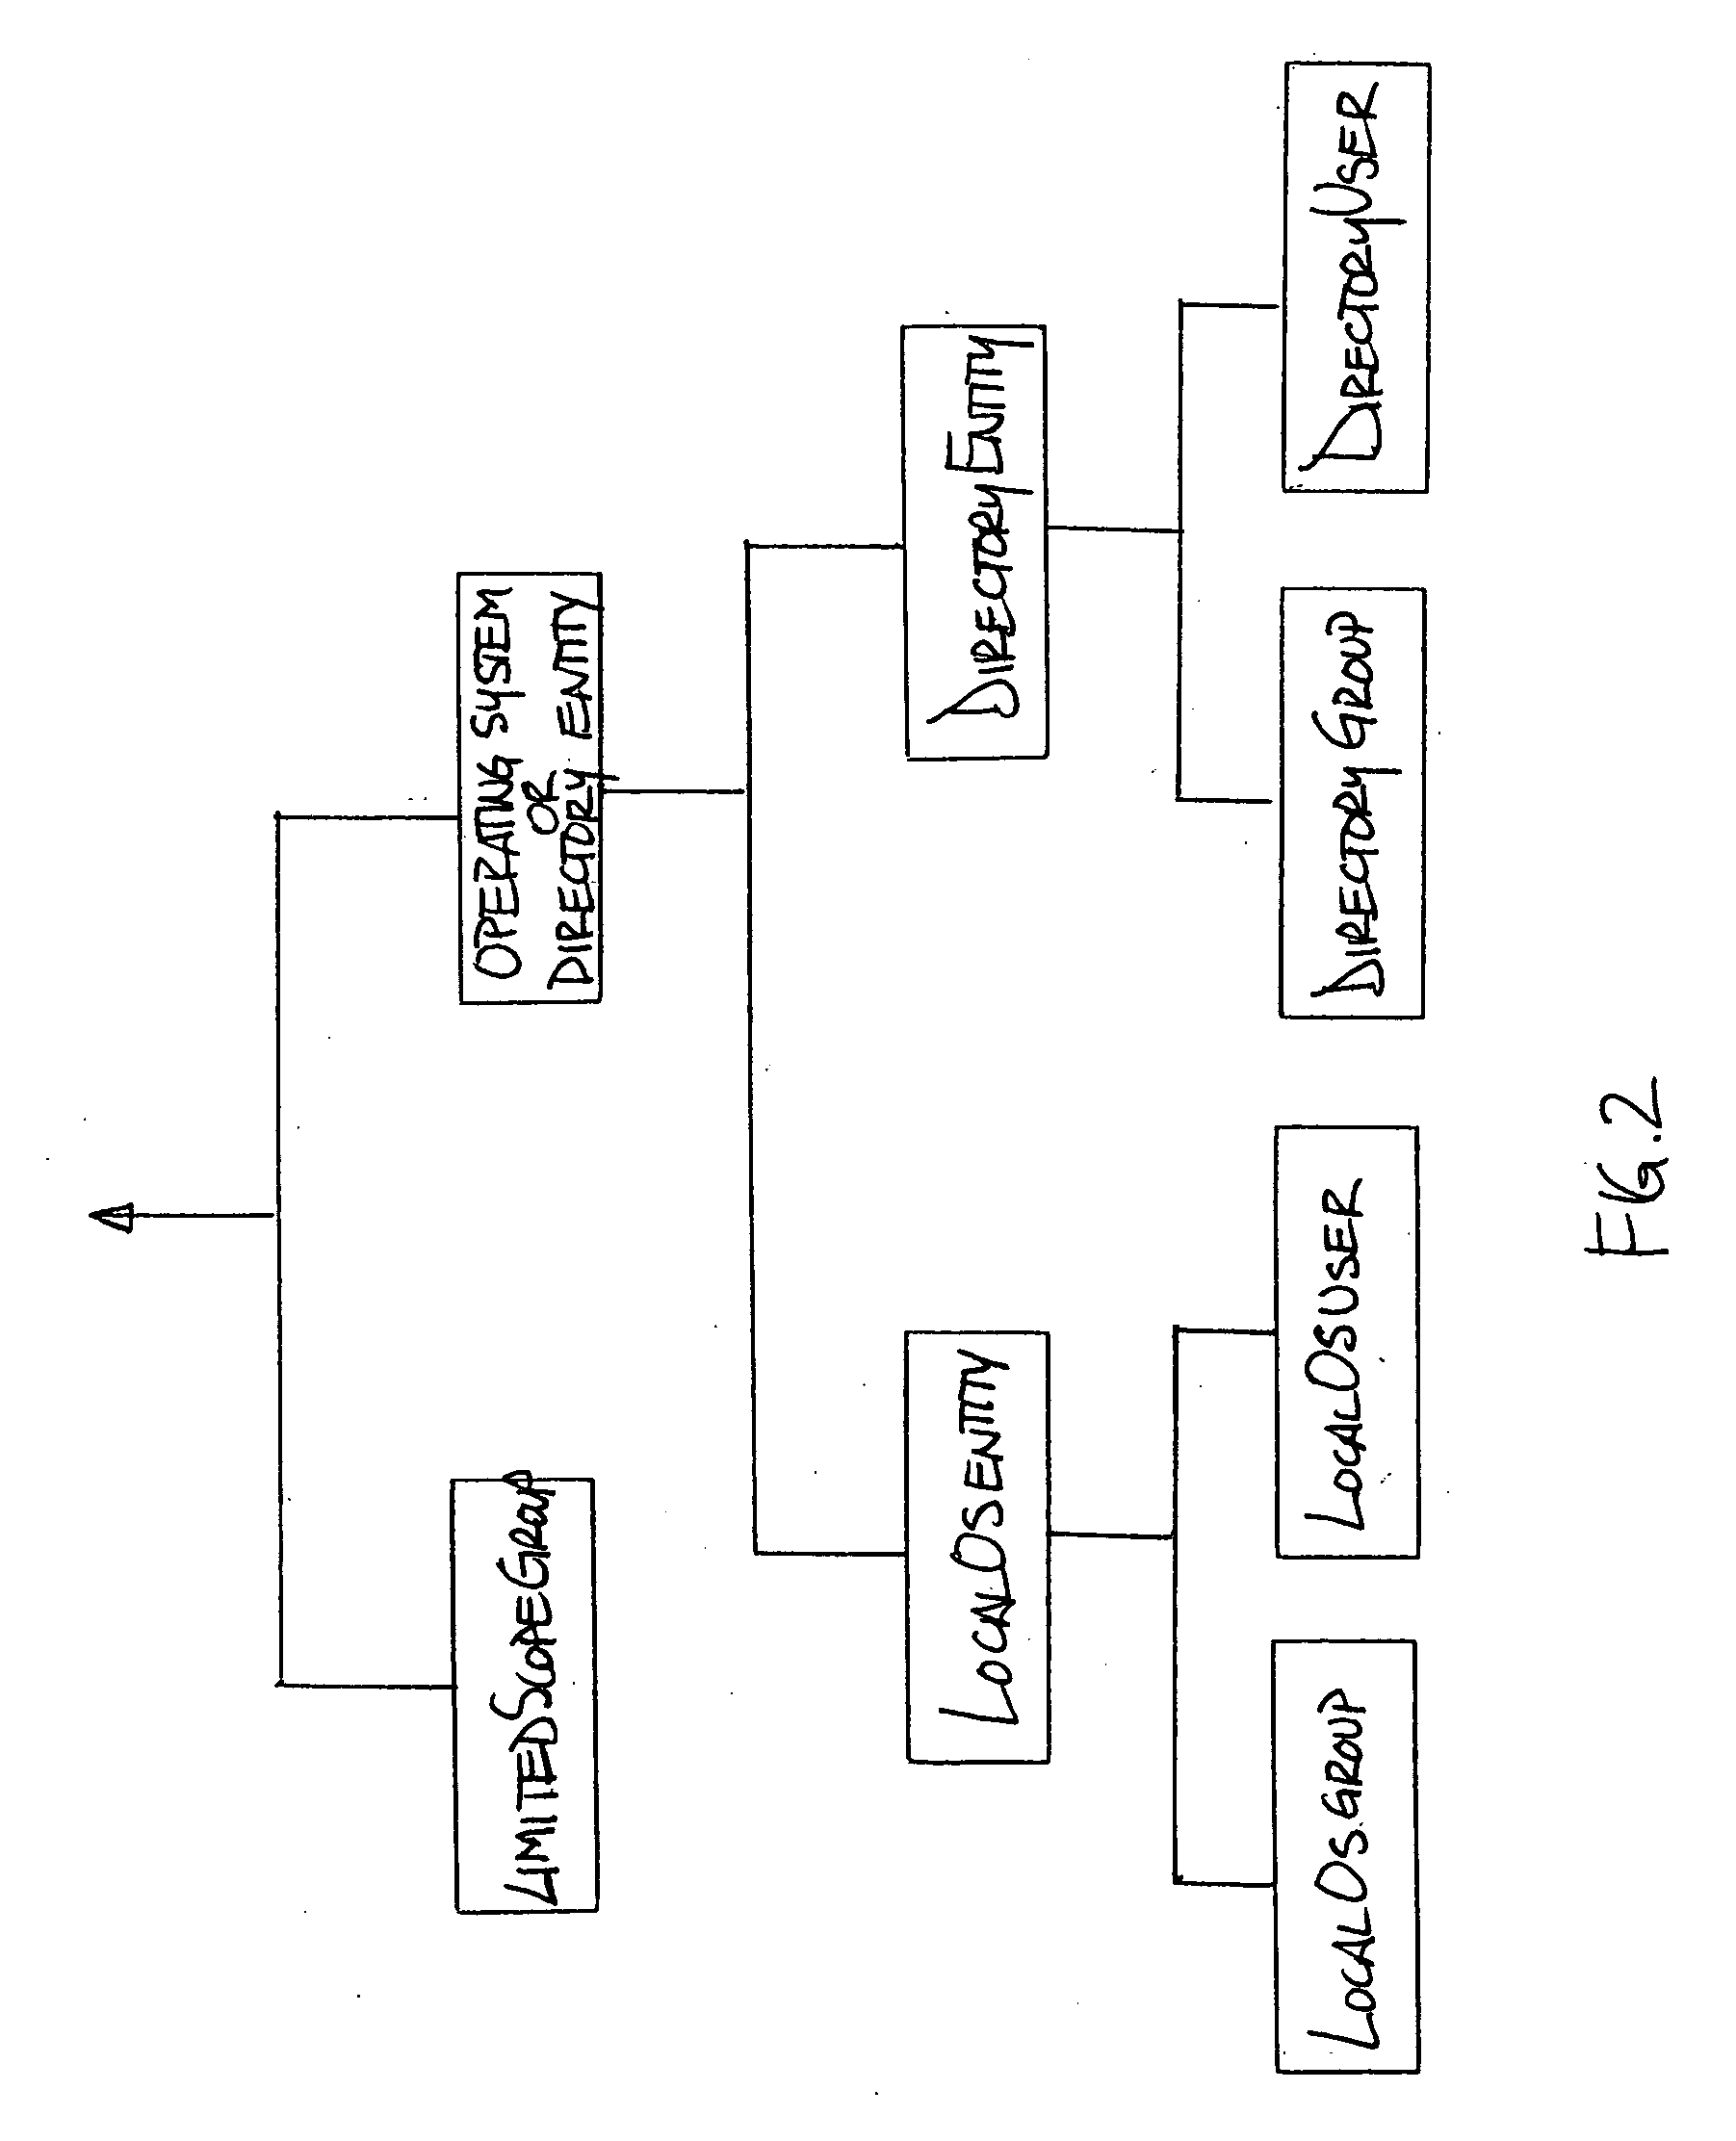 Method and apparatus for centralized security authorization mechanism